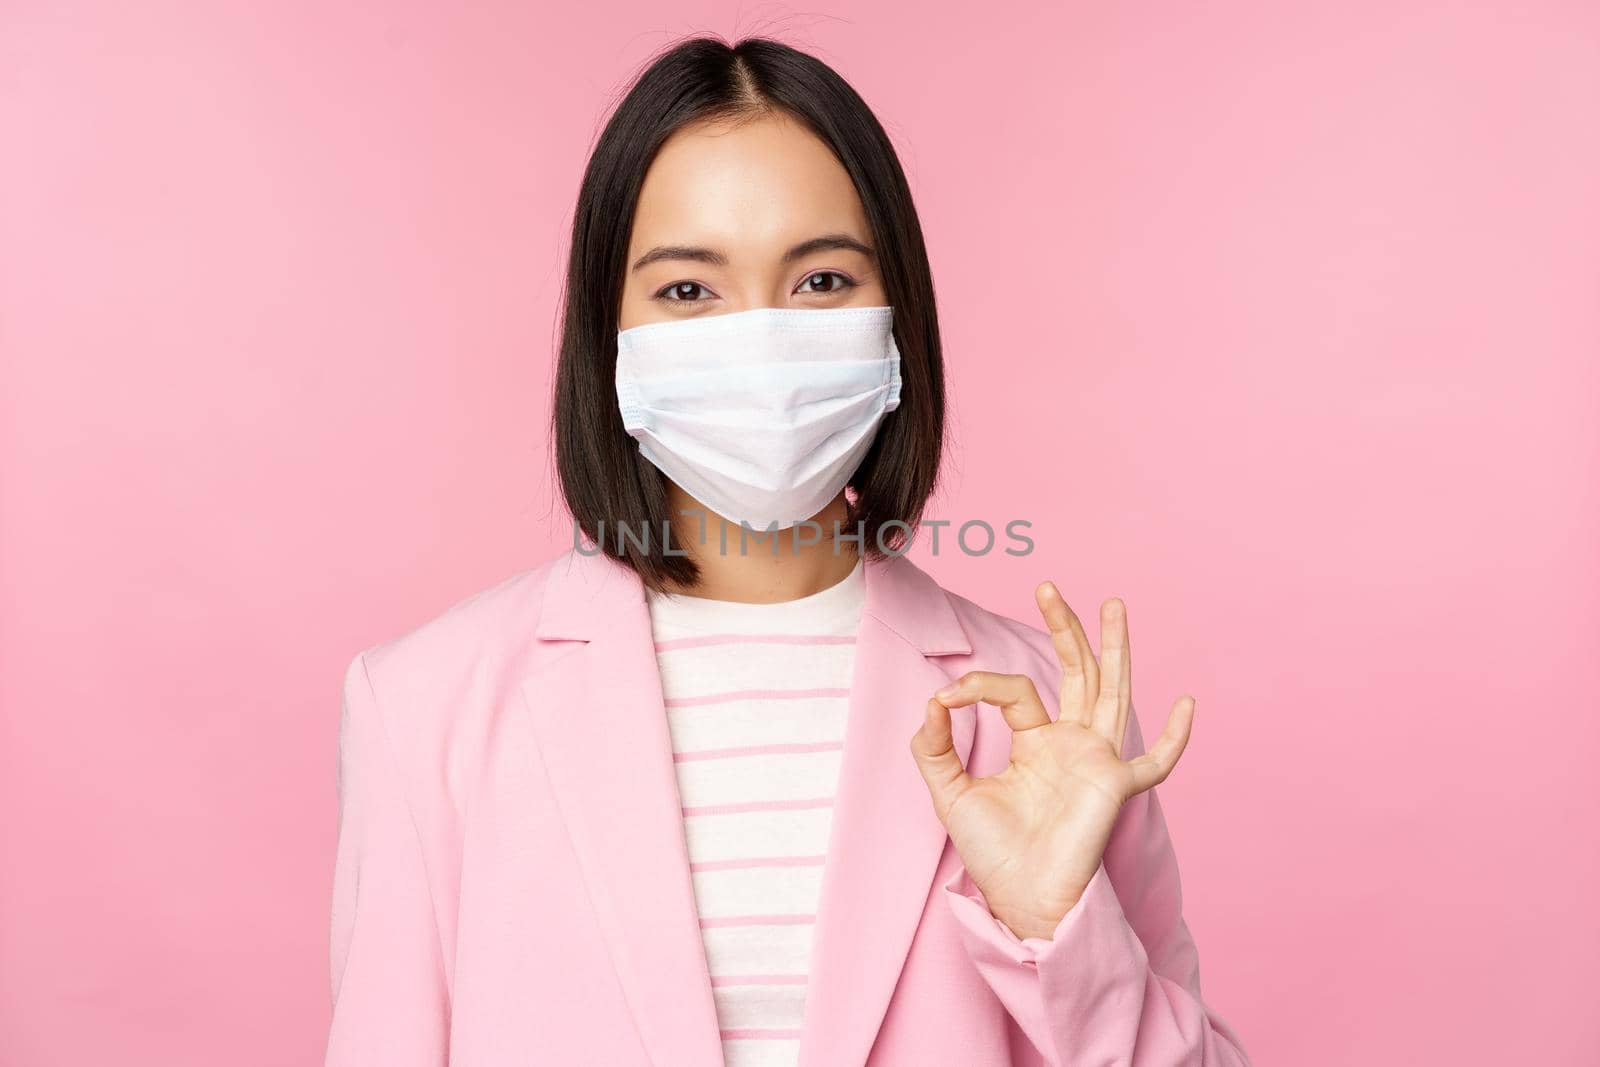 Portrait of asian businesswoman in medical face mask, showing okay sign, wearing suit, work rules during covid-19 pandemic, standing over pink background.